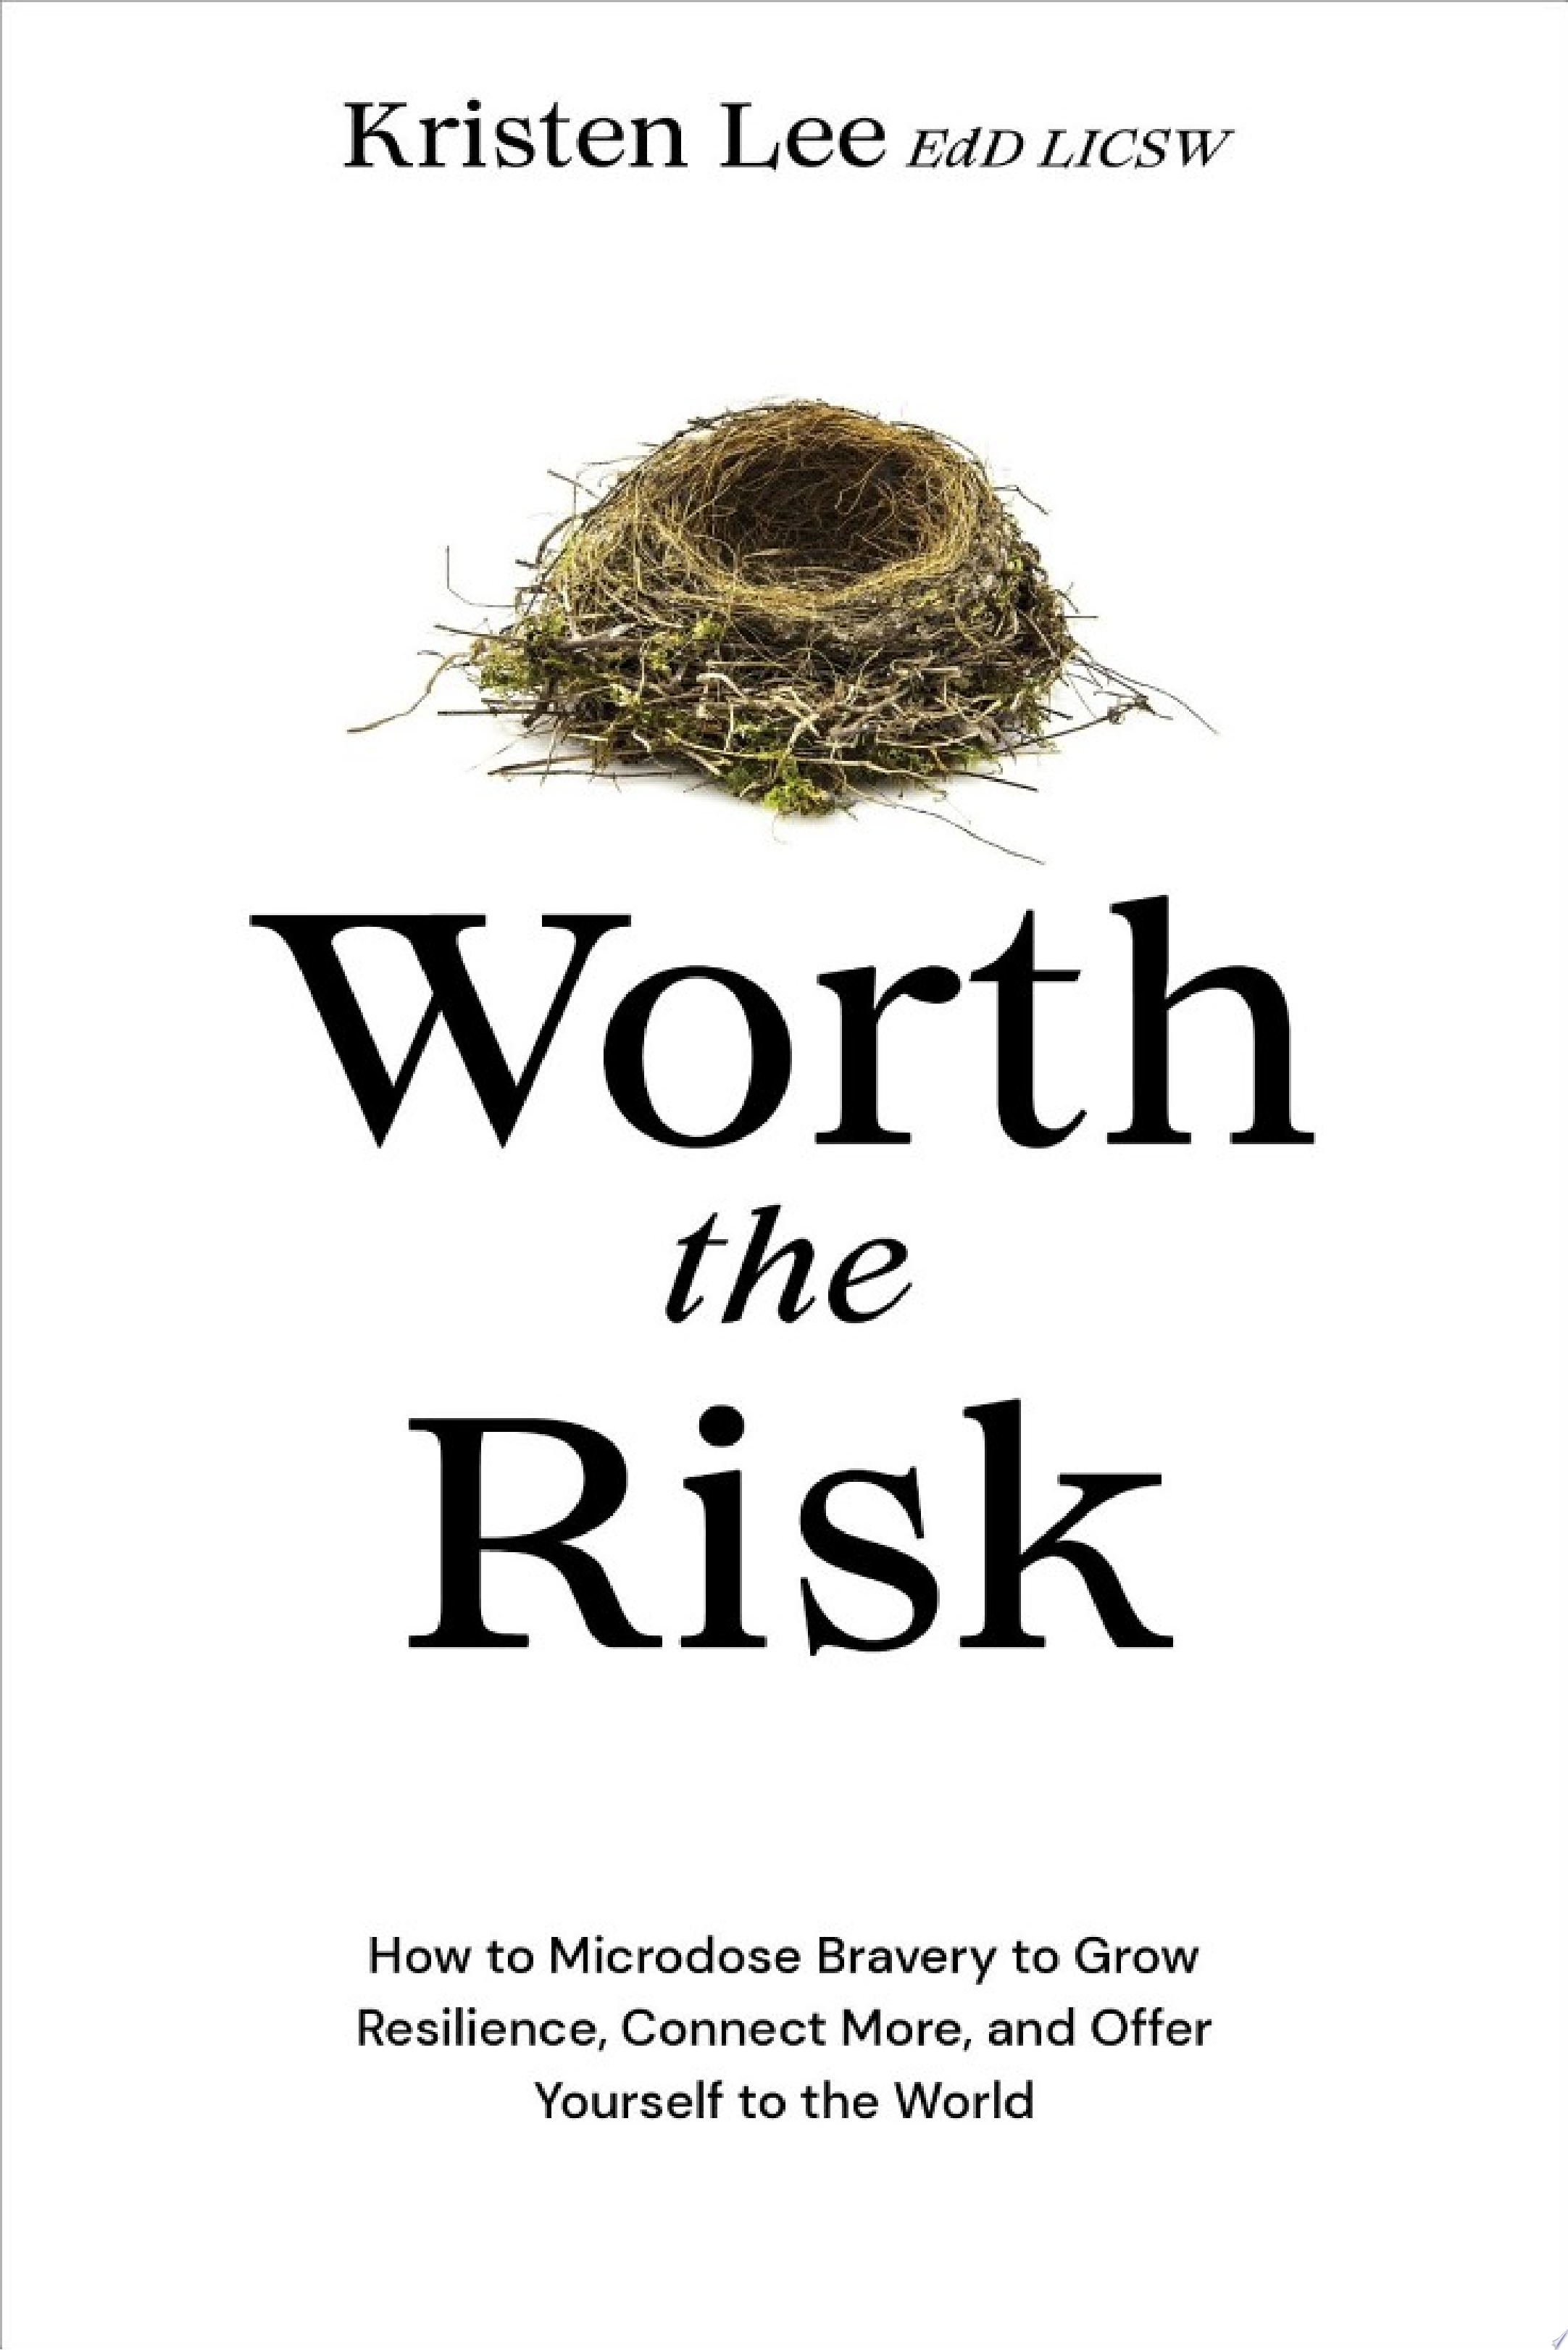 Image for "Worth the Risk"